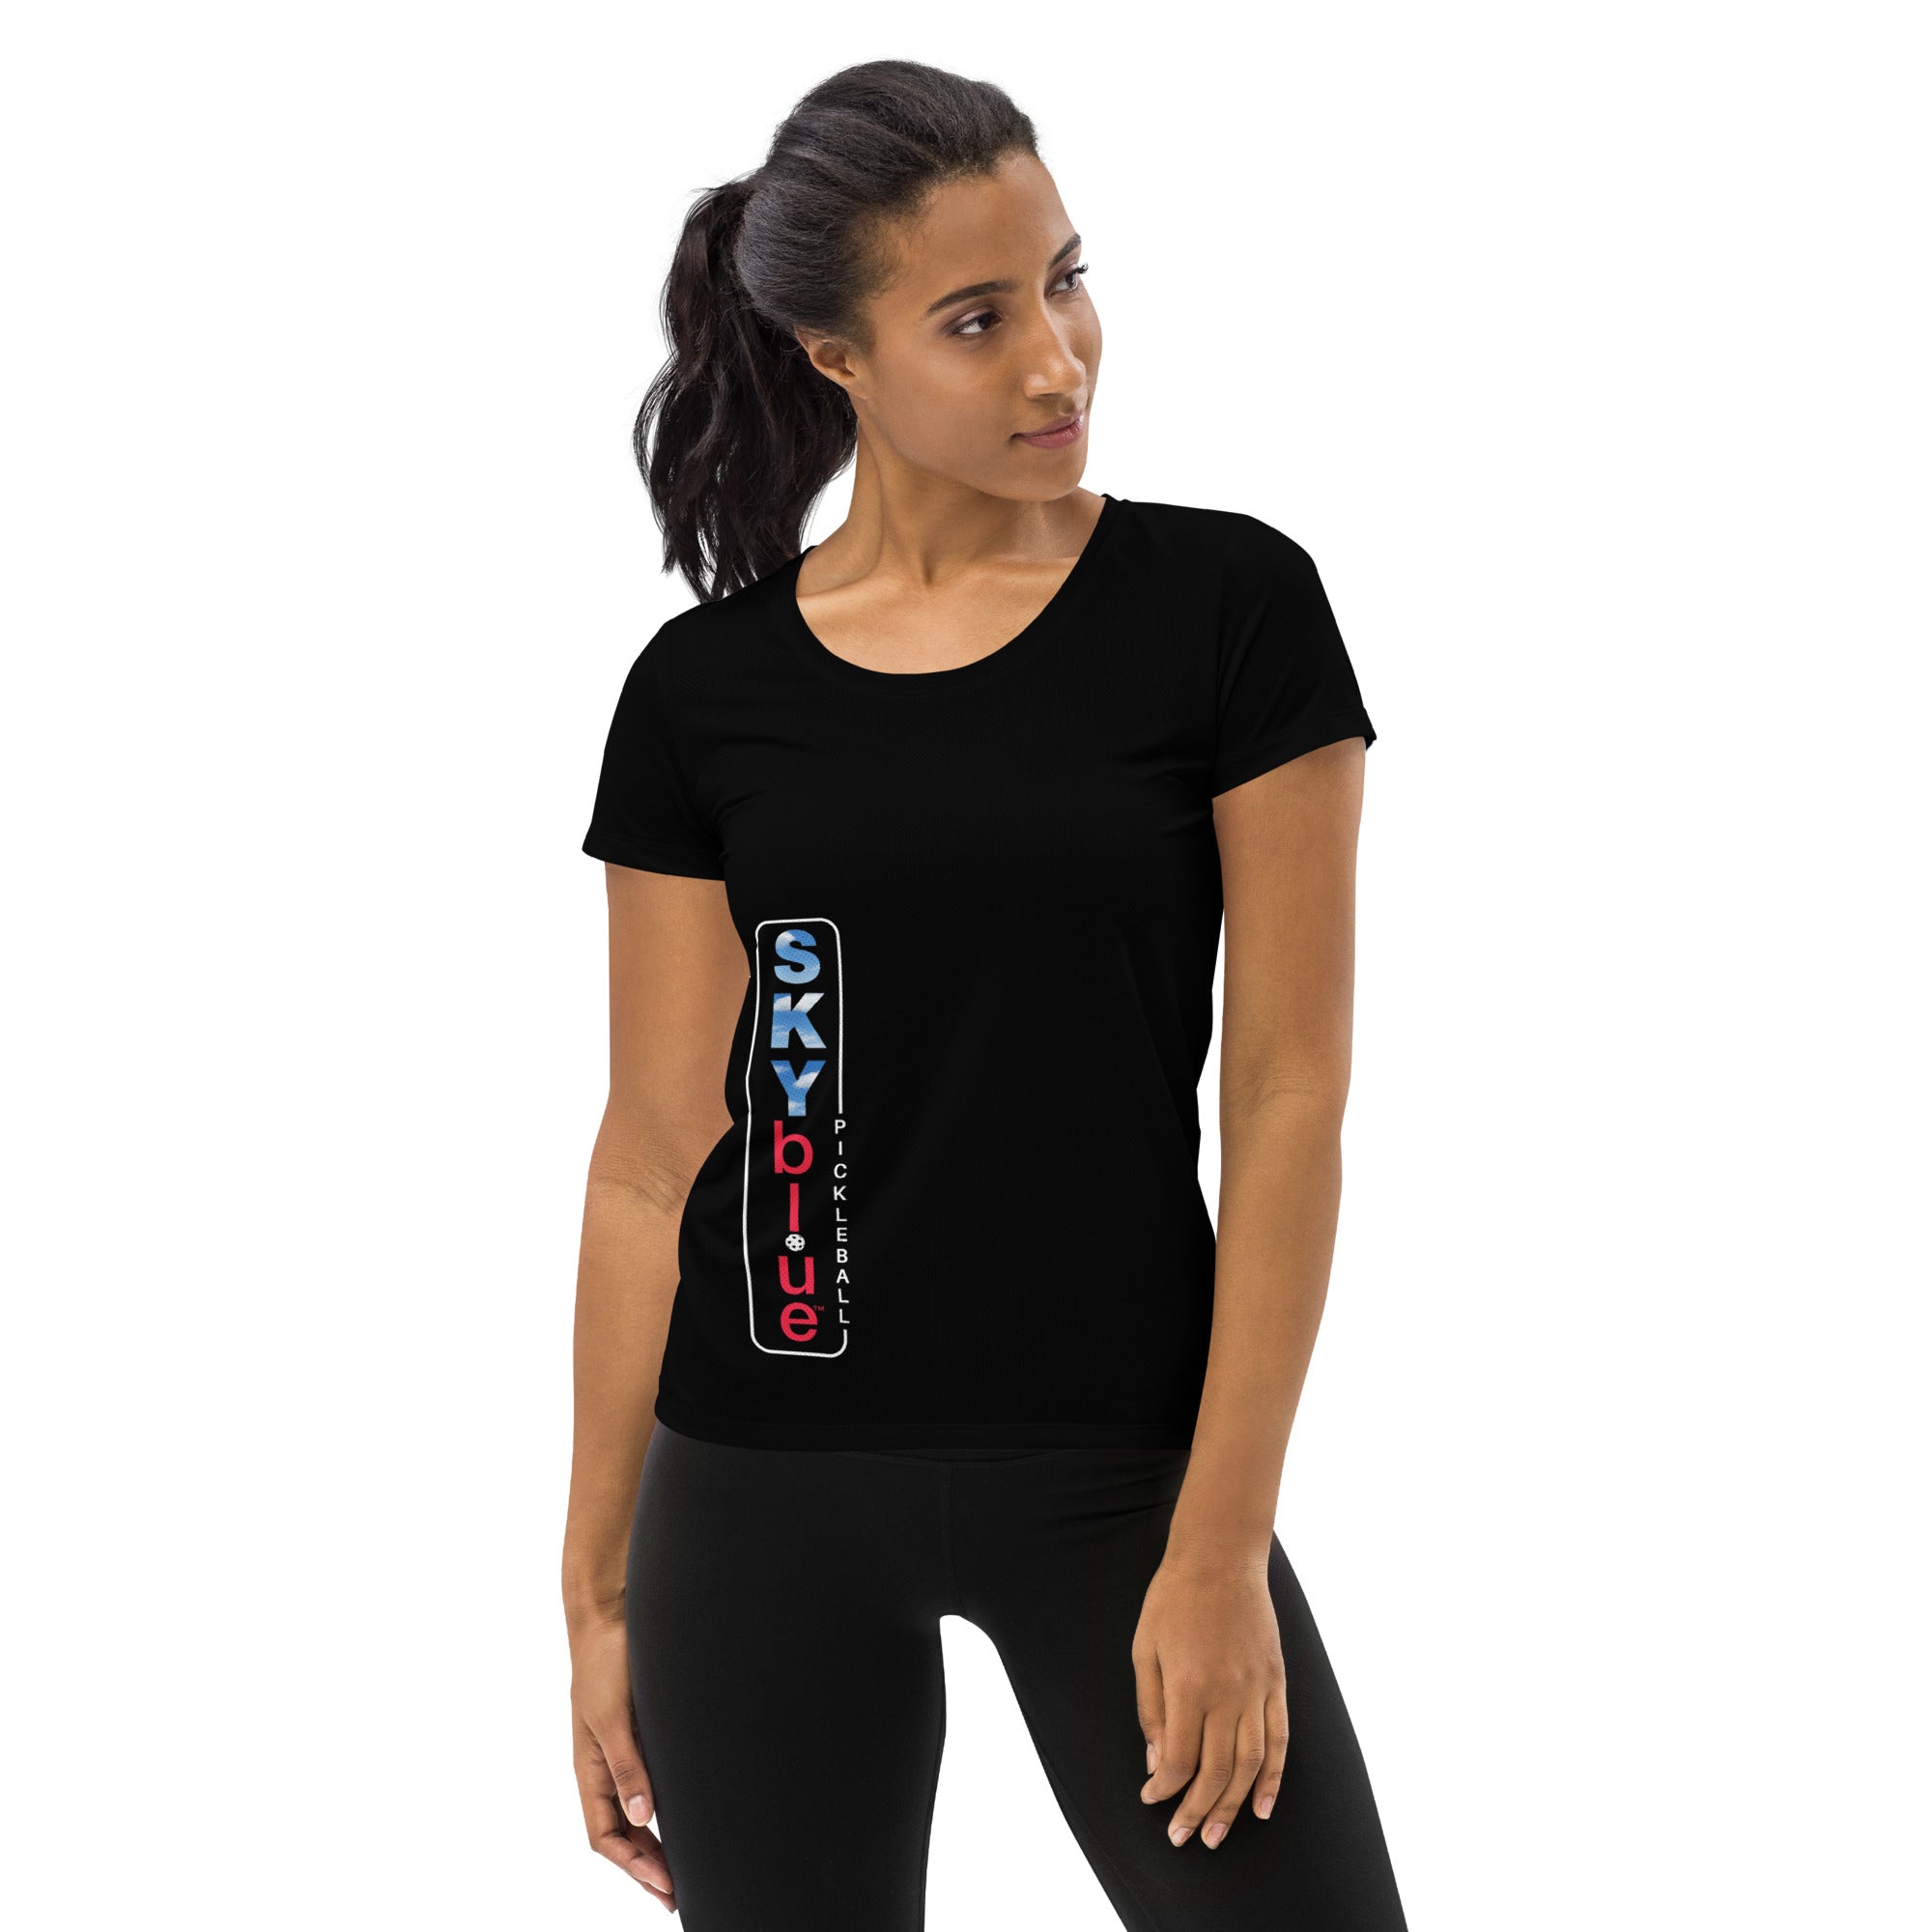 SKYblue™ Black & Red Women's Performance Athletic T-Shirt for Pickleball Enthusiasts - Play Pickleball in Style!